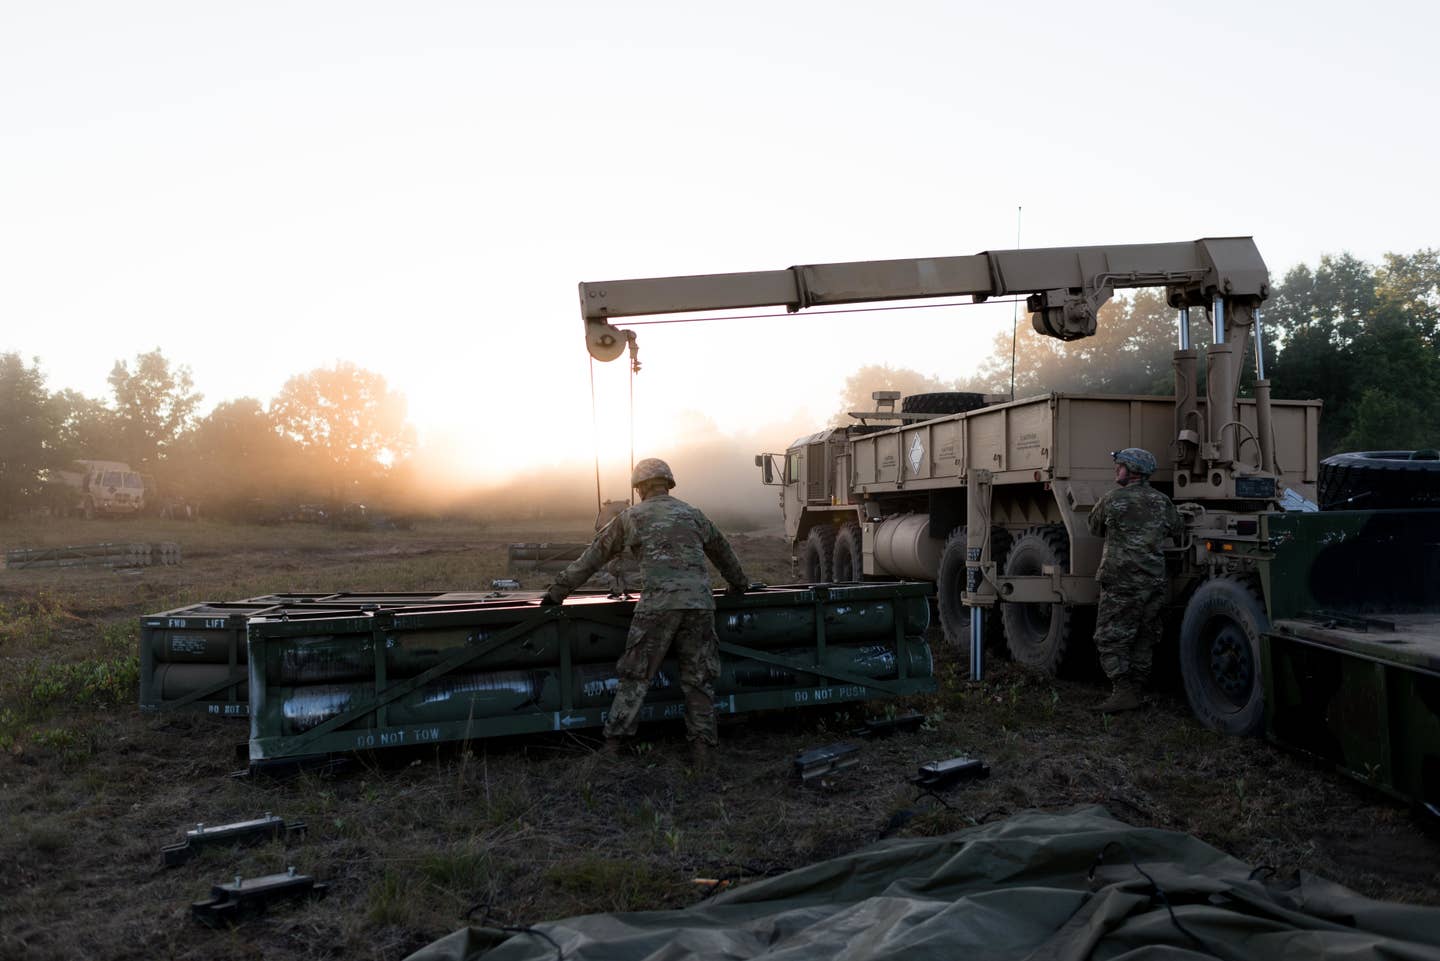 Truck drivers load ammo during an exercise.<br>(U.S. Army photo by Spc. Joshua Boisvert)